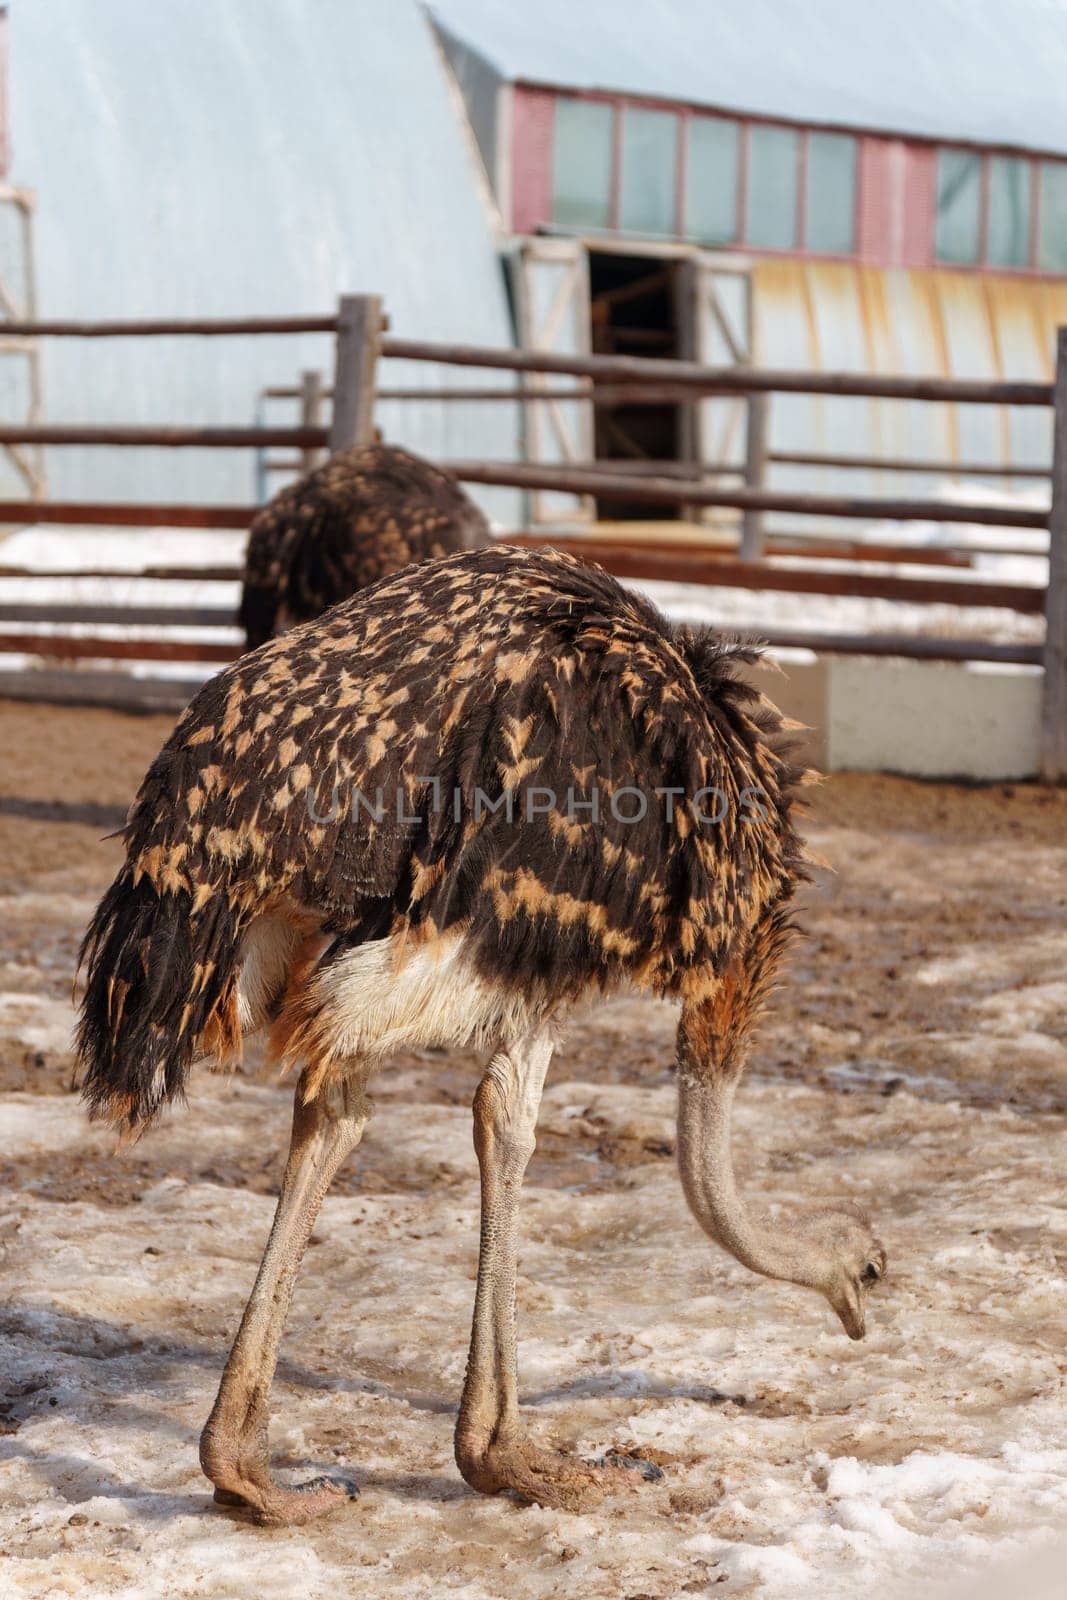 Ostrich is standing in a pen on an ostrich farm, with a barn visible in the background. Vertical photo